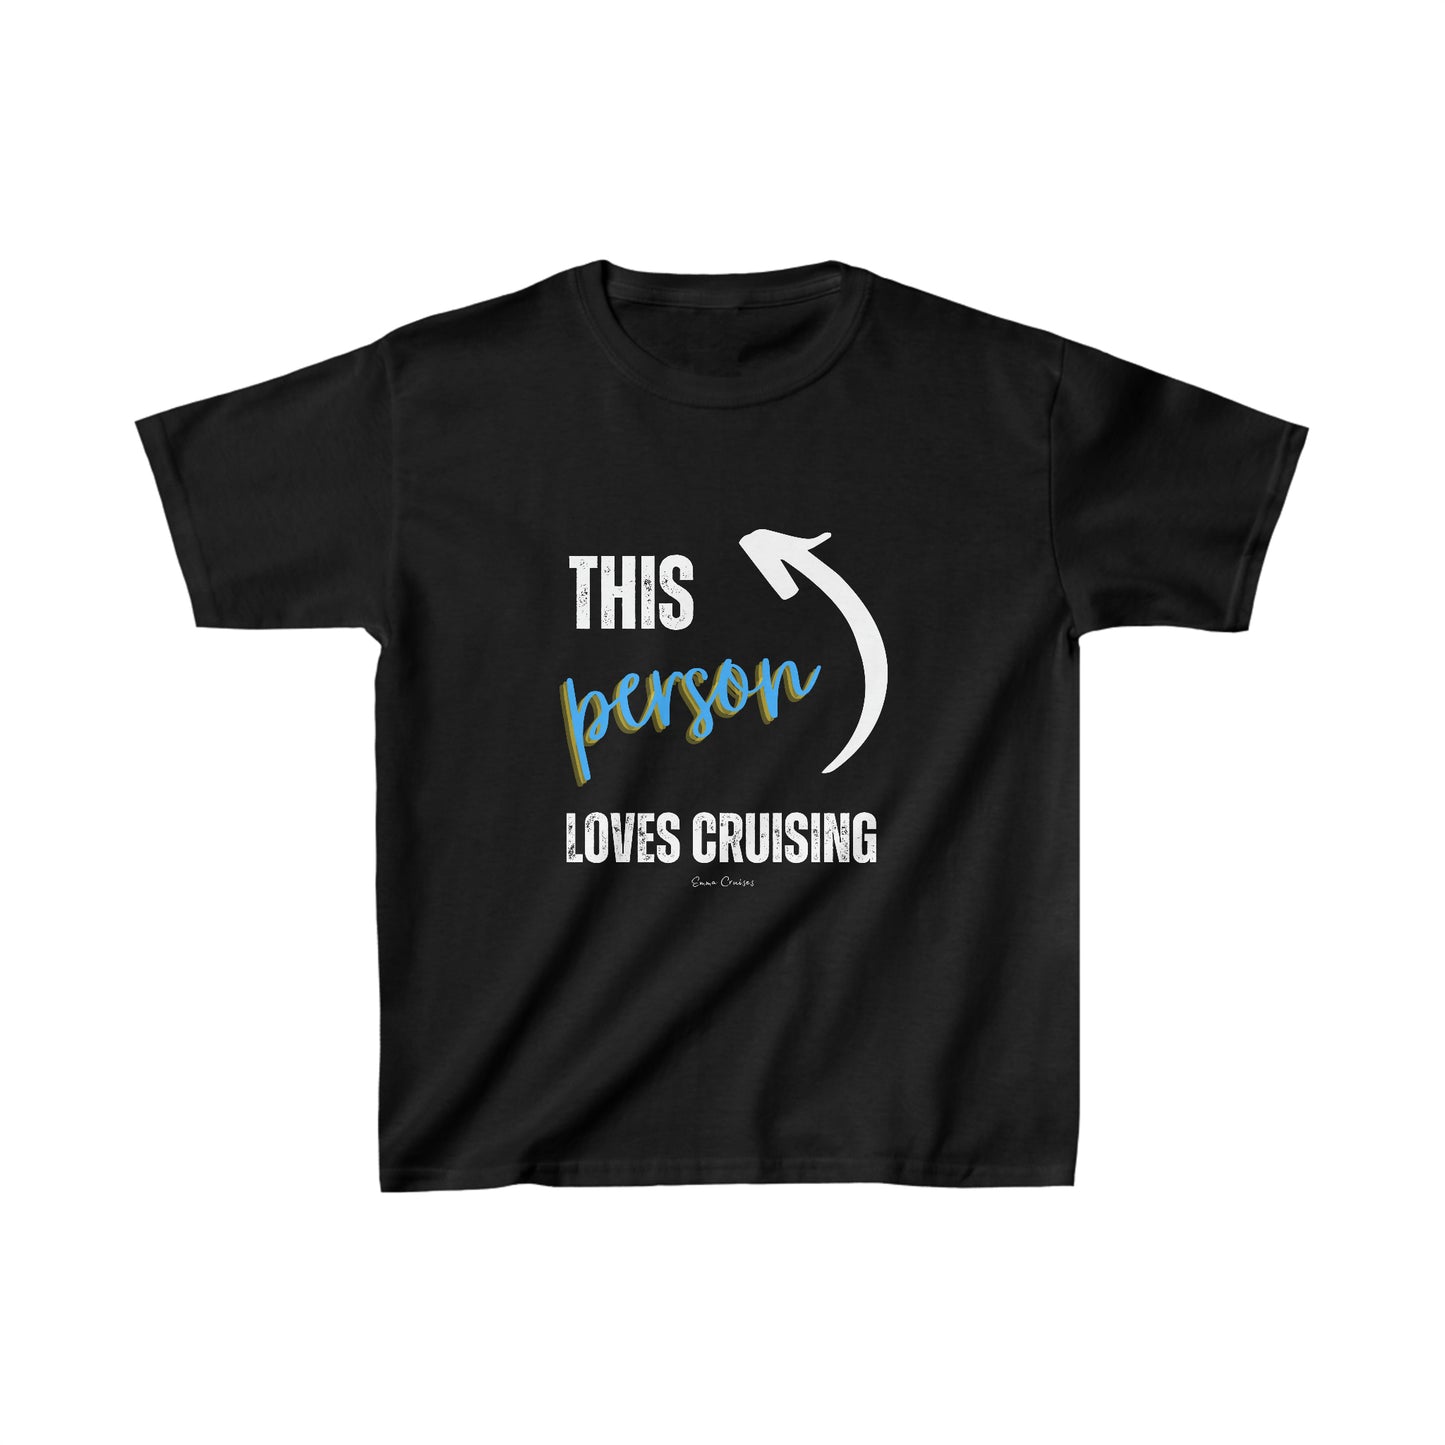 This Person Loves Cruising - Kids UNISEX T-Shirt